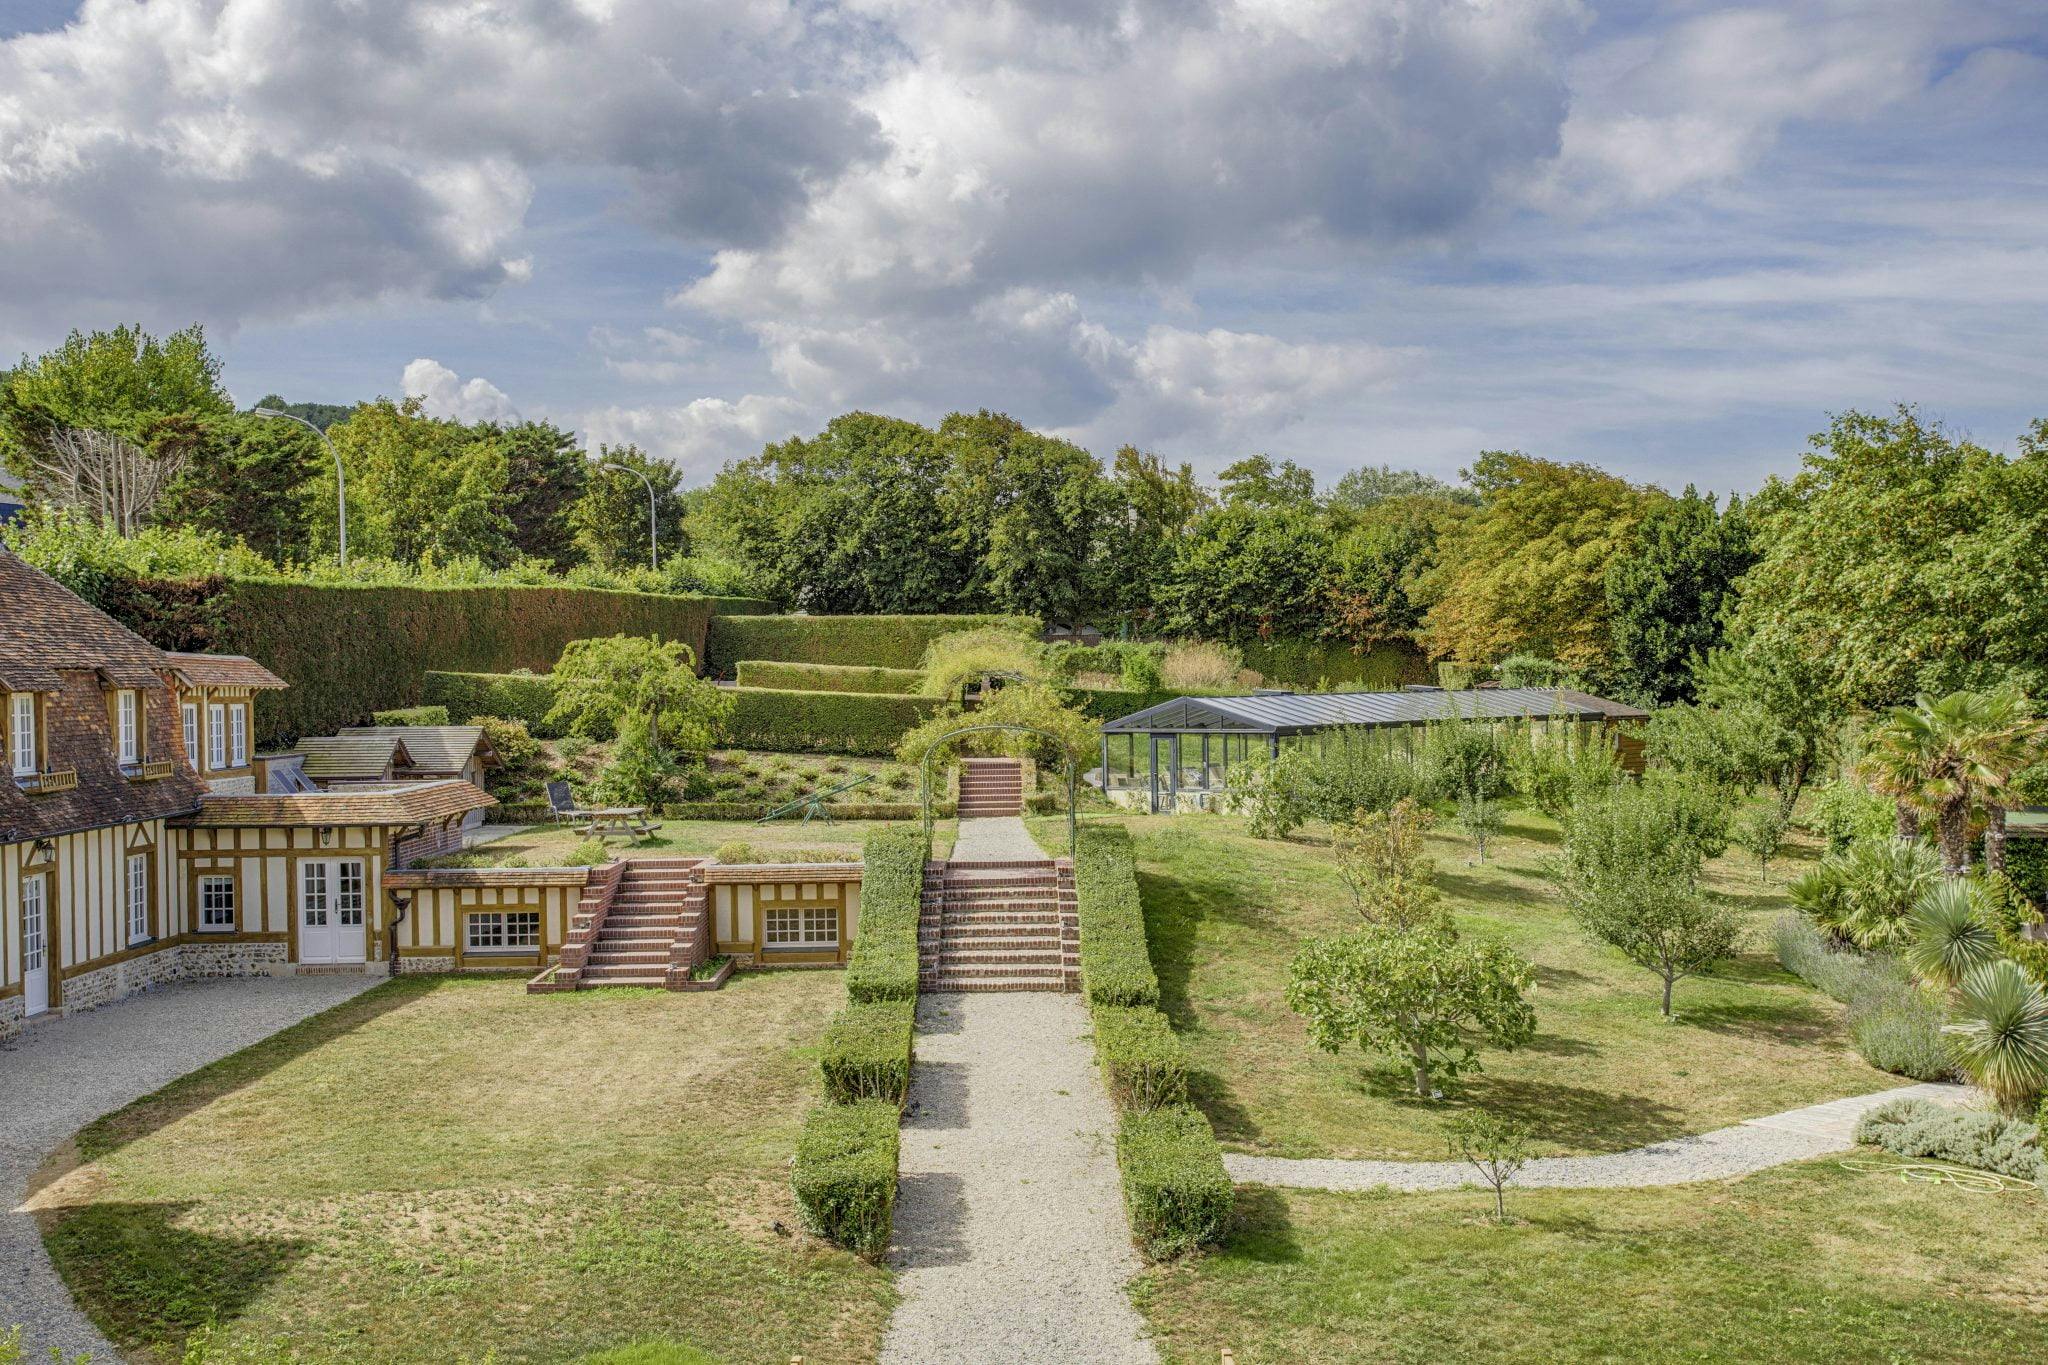  A two-hectare garden, an ideal playground for both children and adults alike